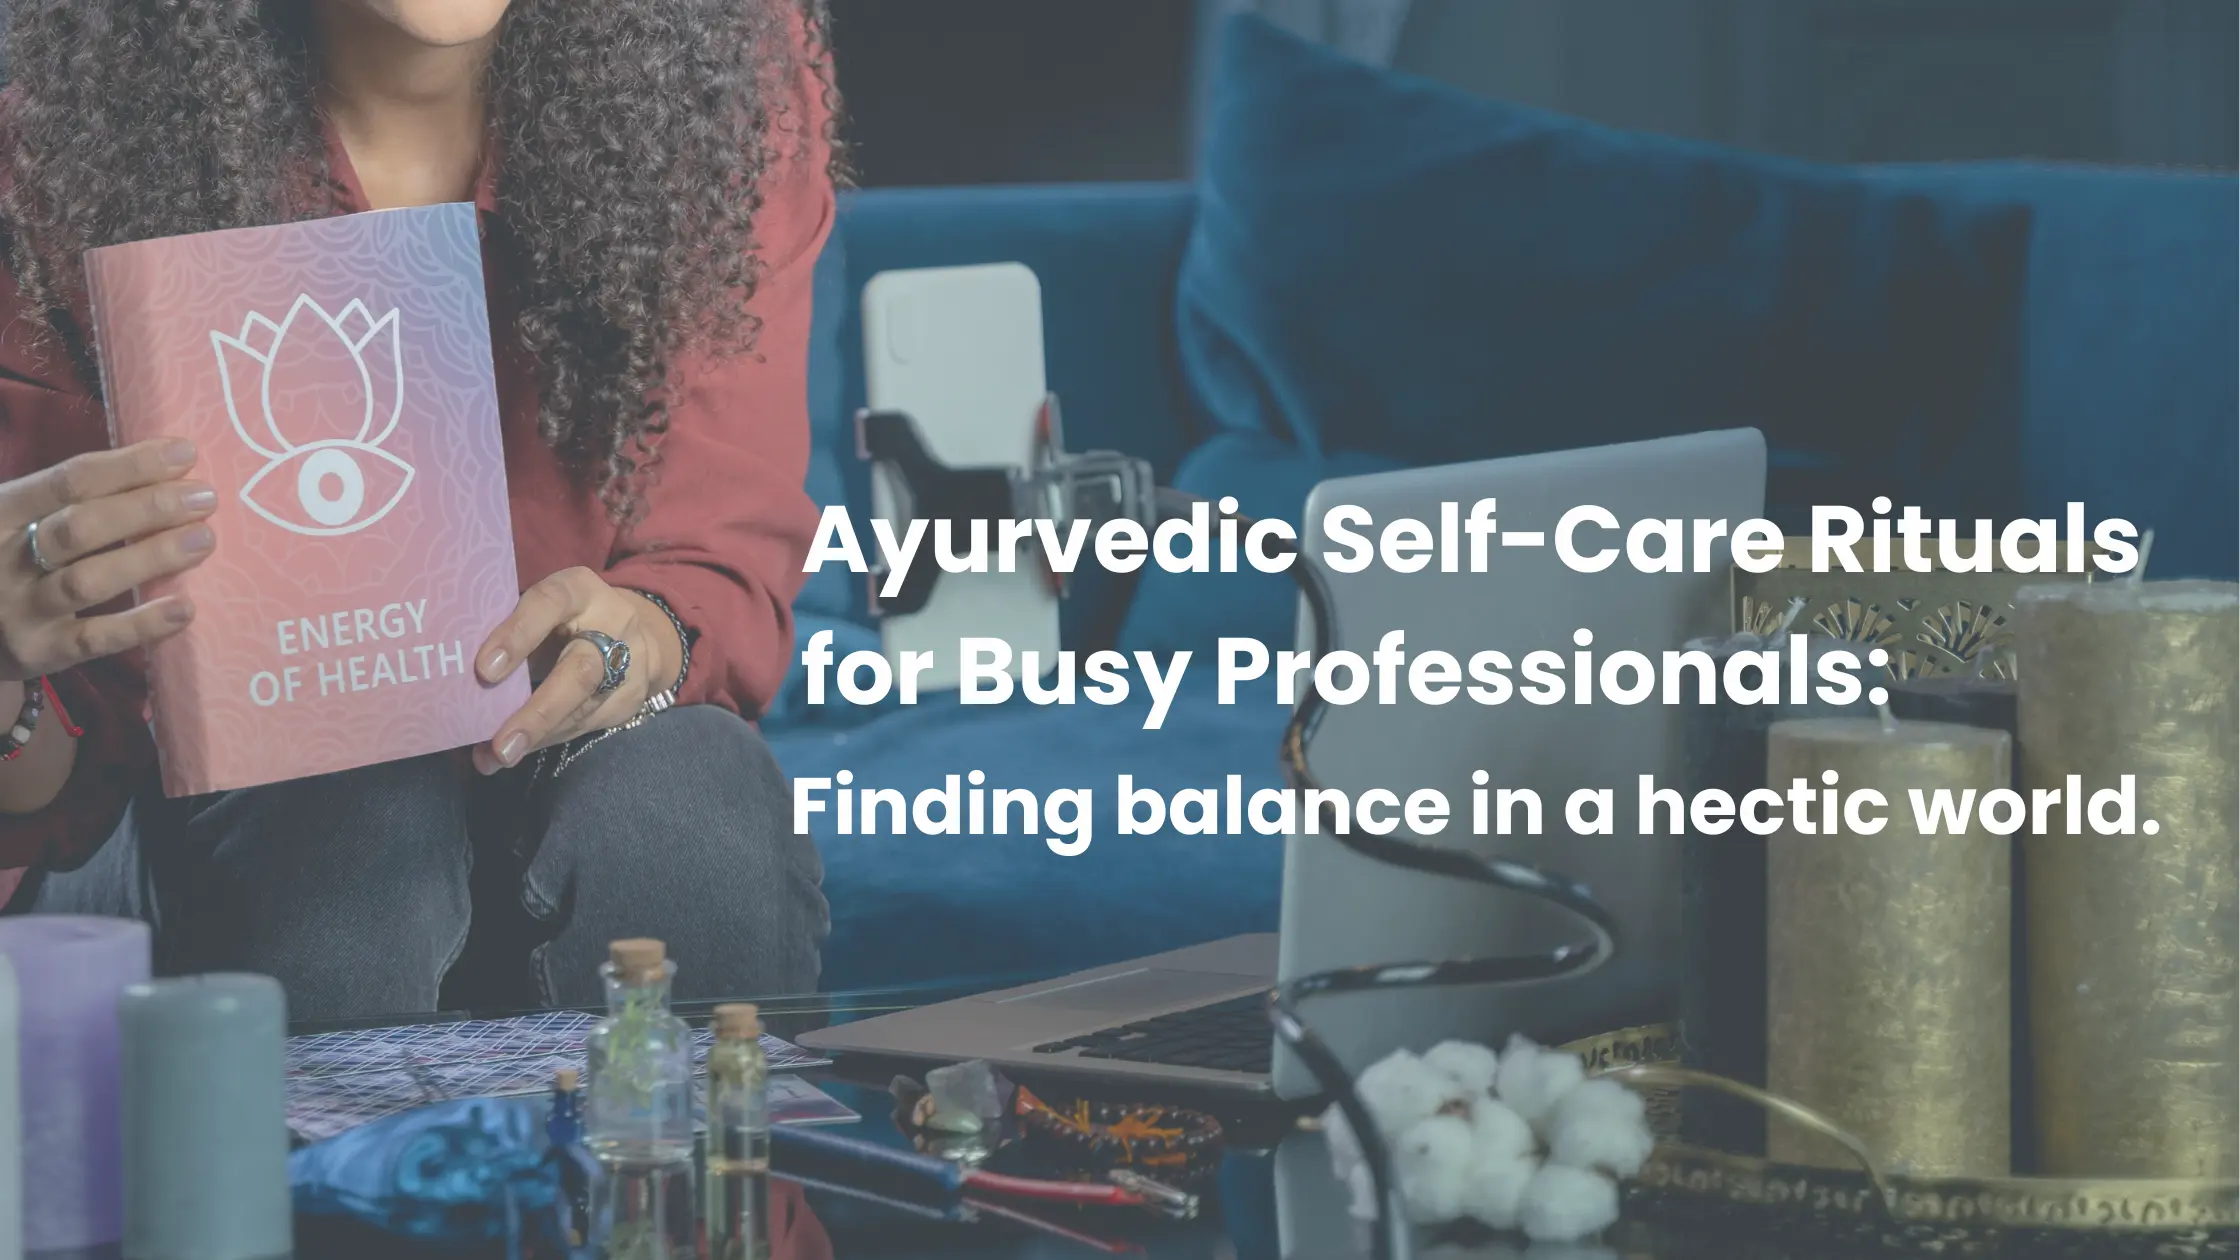 Ayurvedic Self-Care Rituals for Busy Professionals Finding Balance in a Hectic World